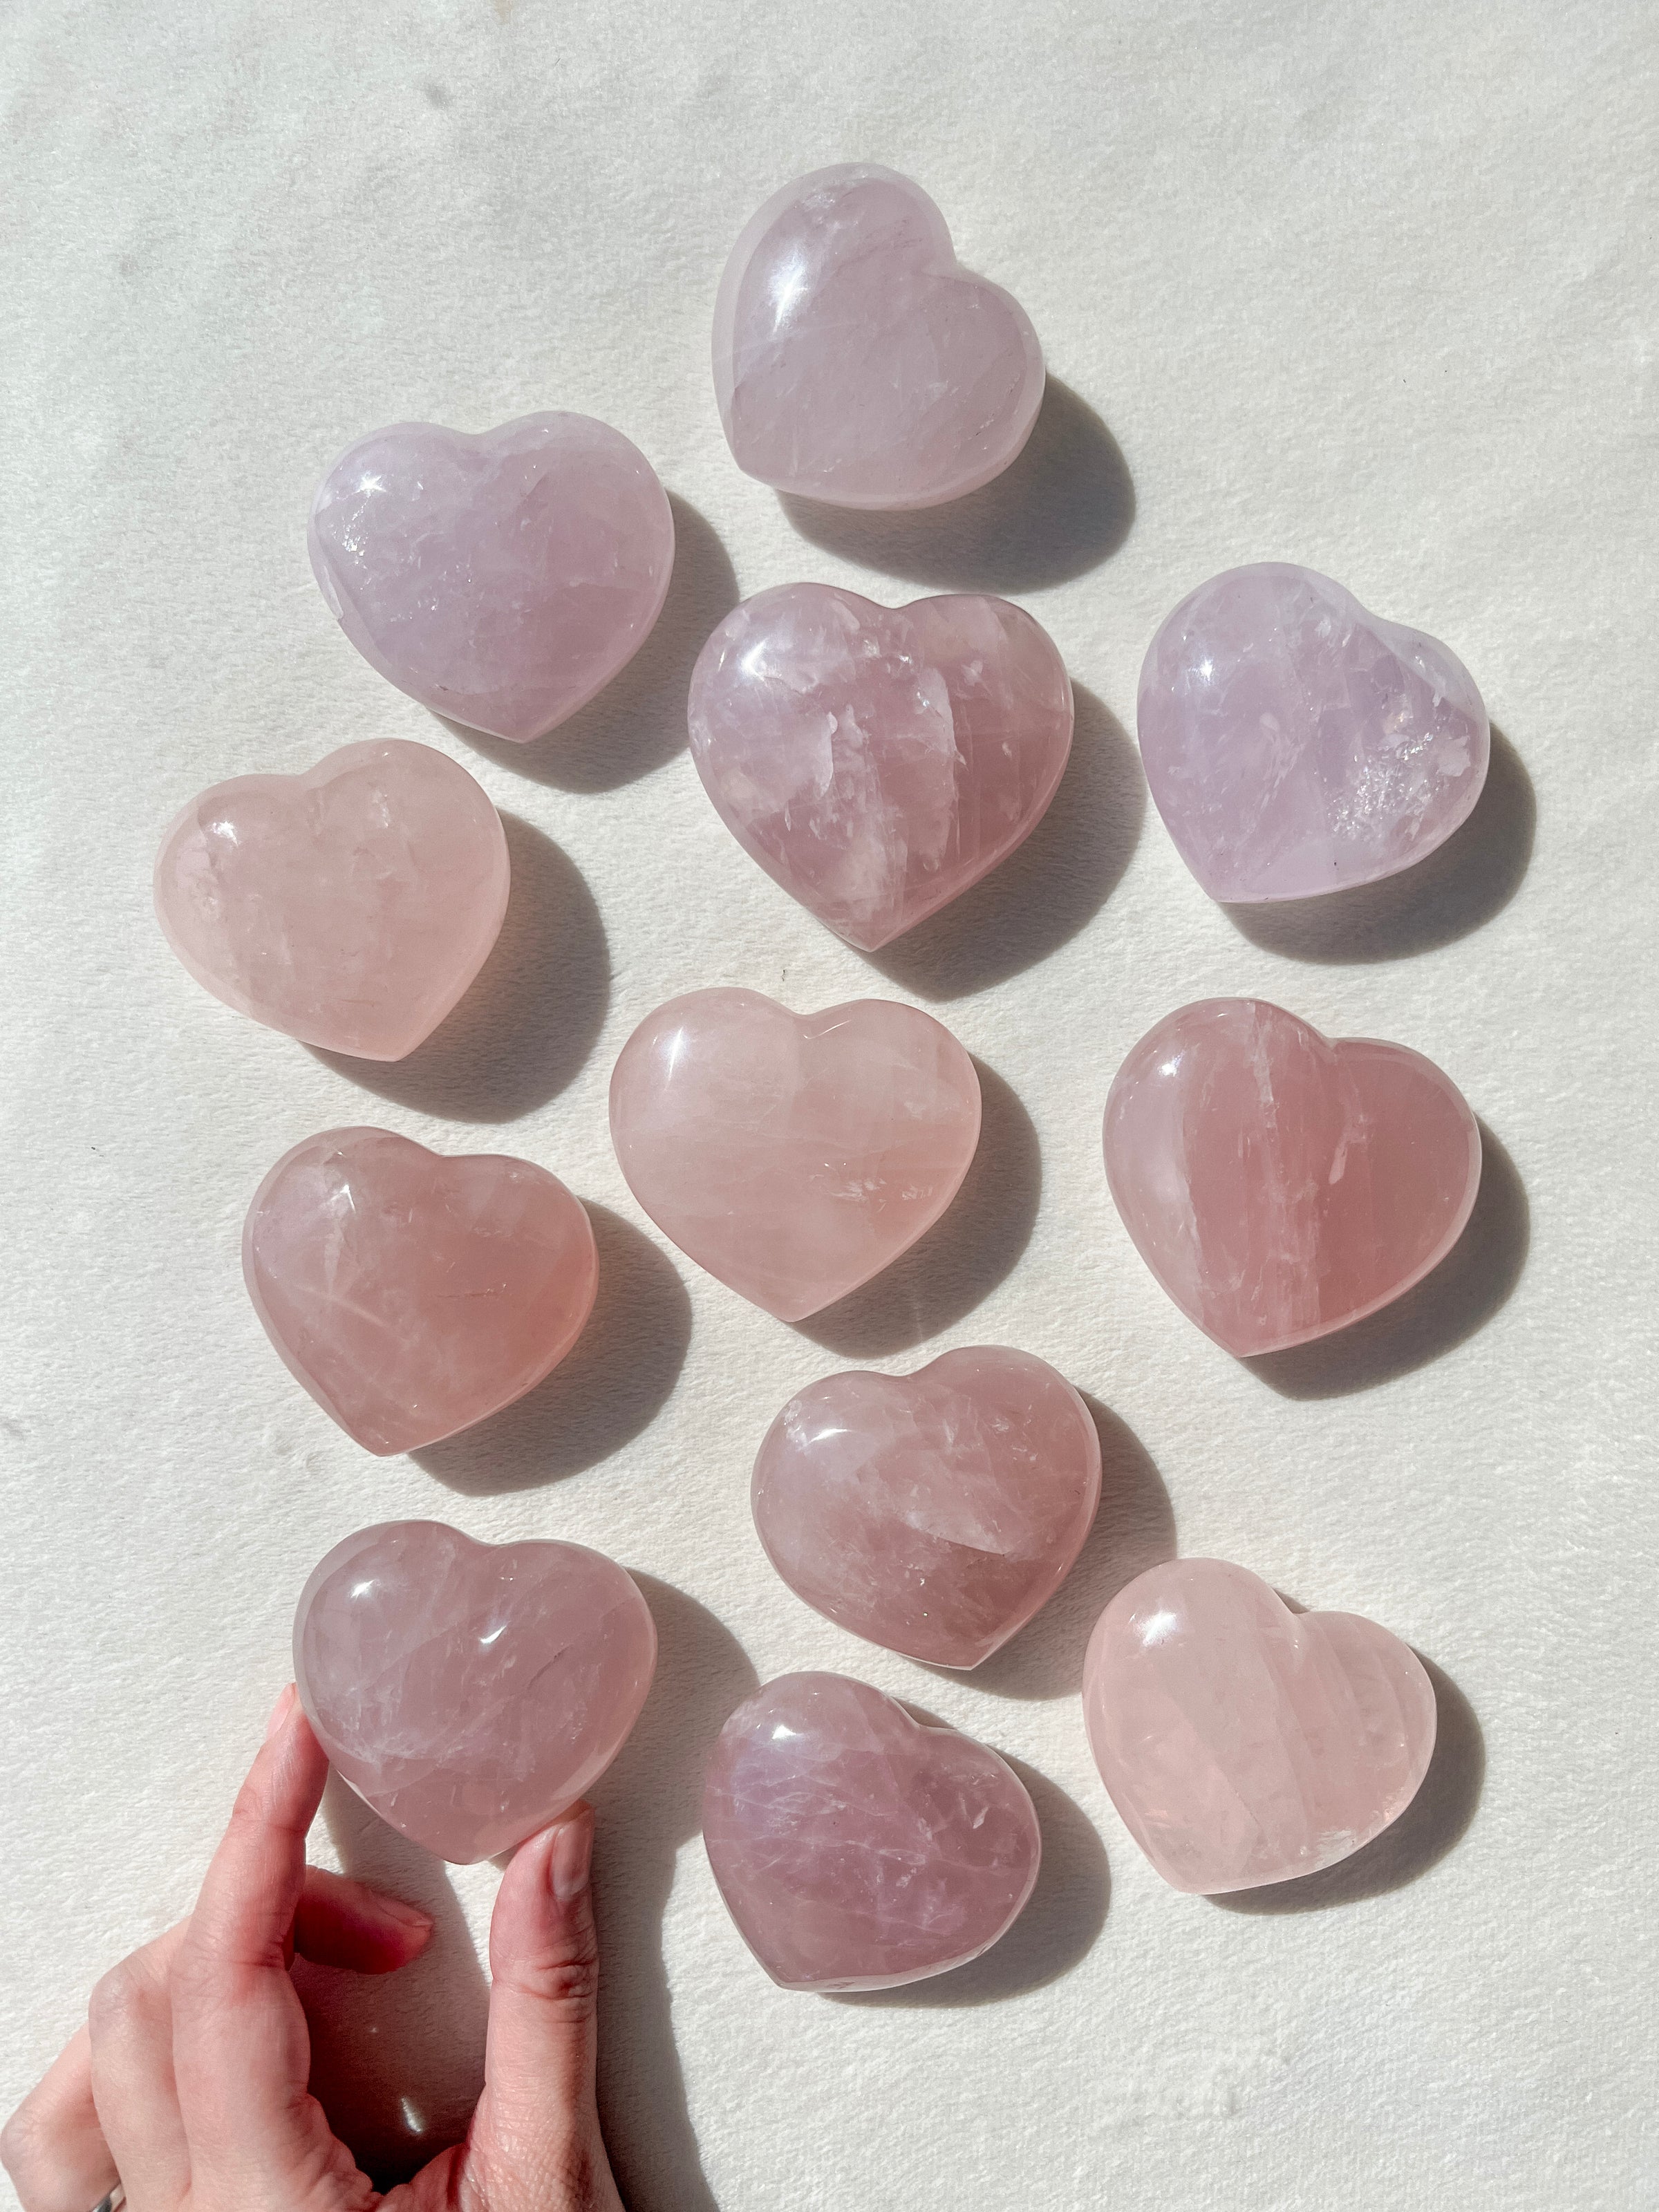 Crystals for Love + Self-Care